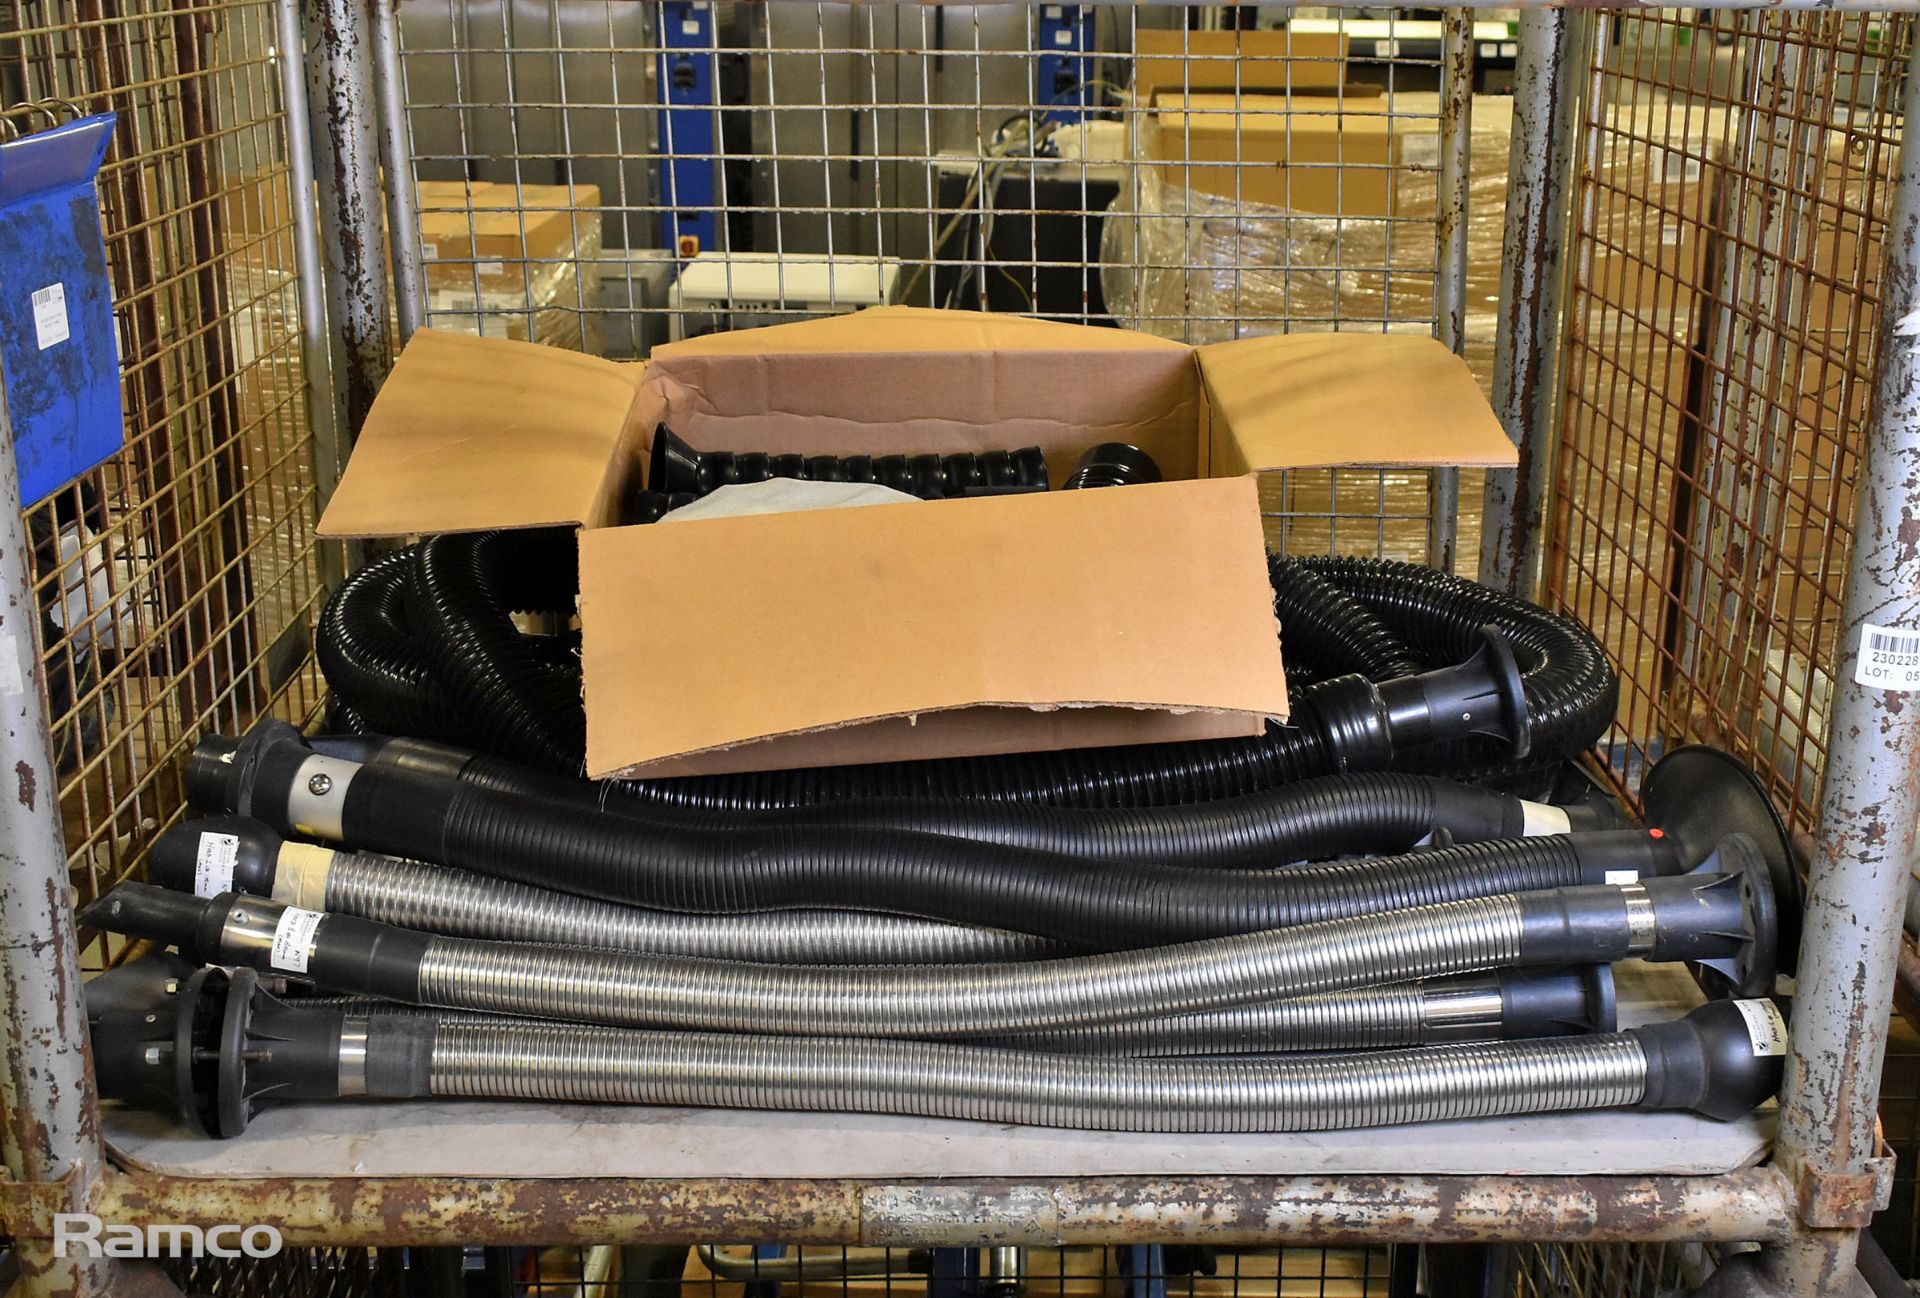 Multiple types of fume extractor hoses